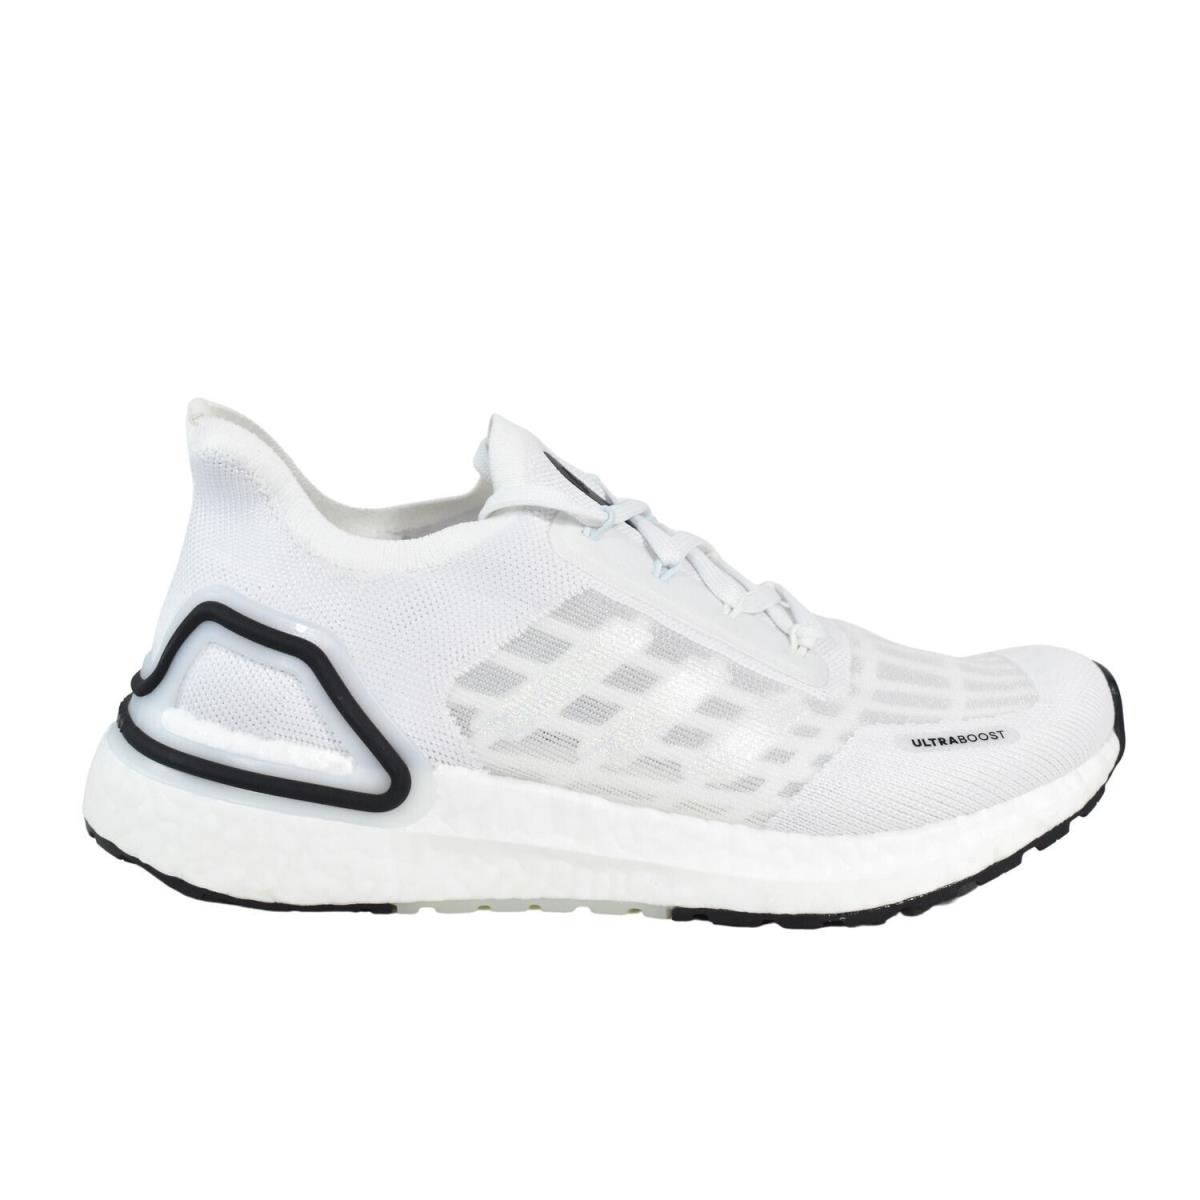 Adidas Ultraboost Summer.rdy `white Black` FY3473 Running Shoes